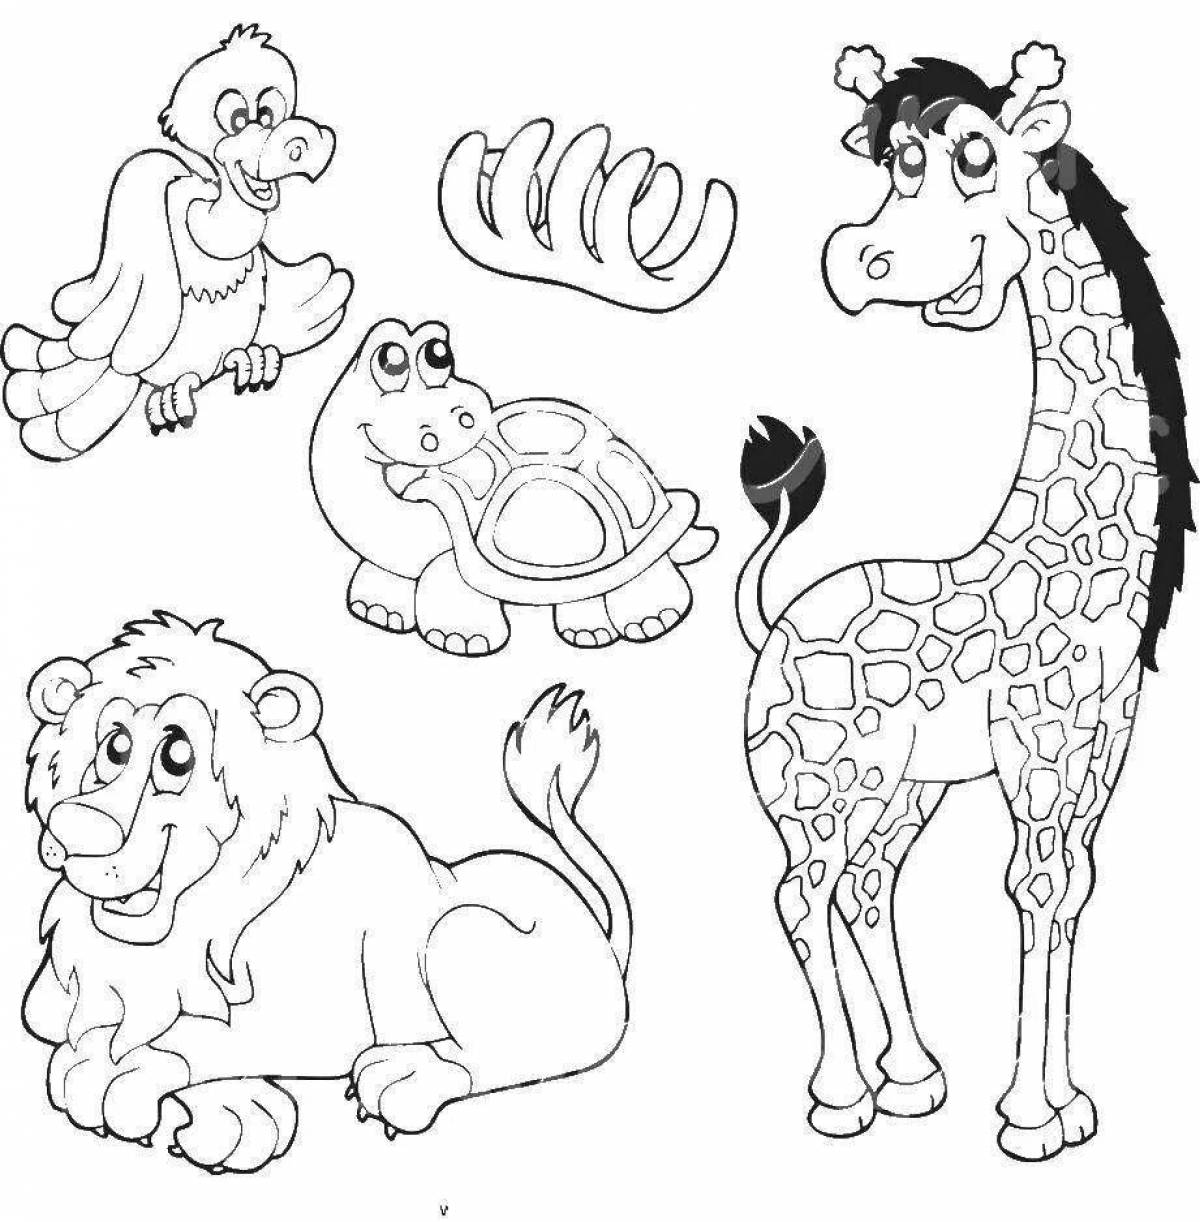 Amazing African animals coloring page for 3-4 year olds